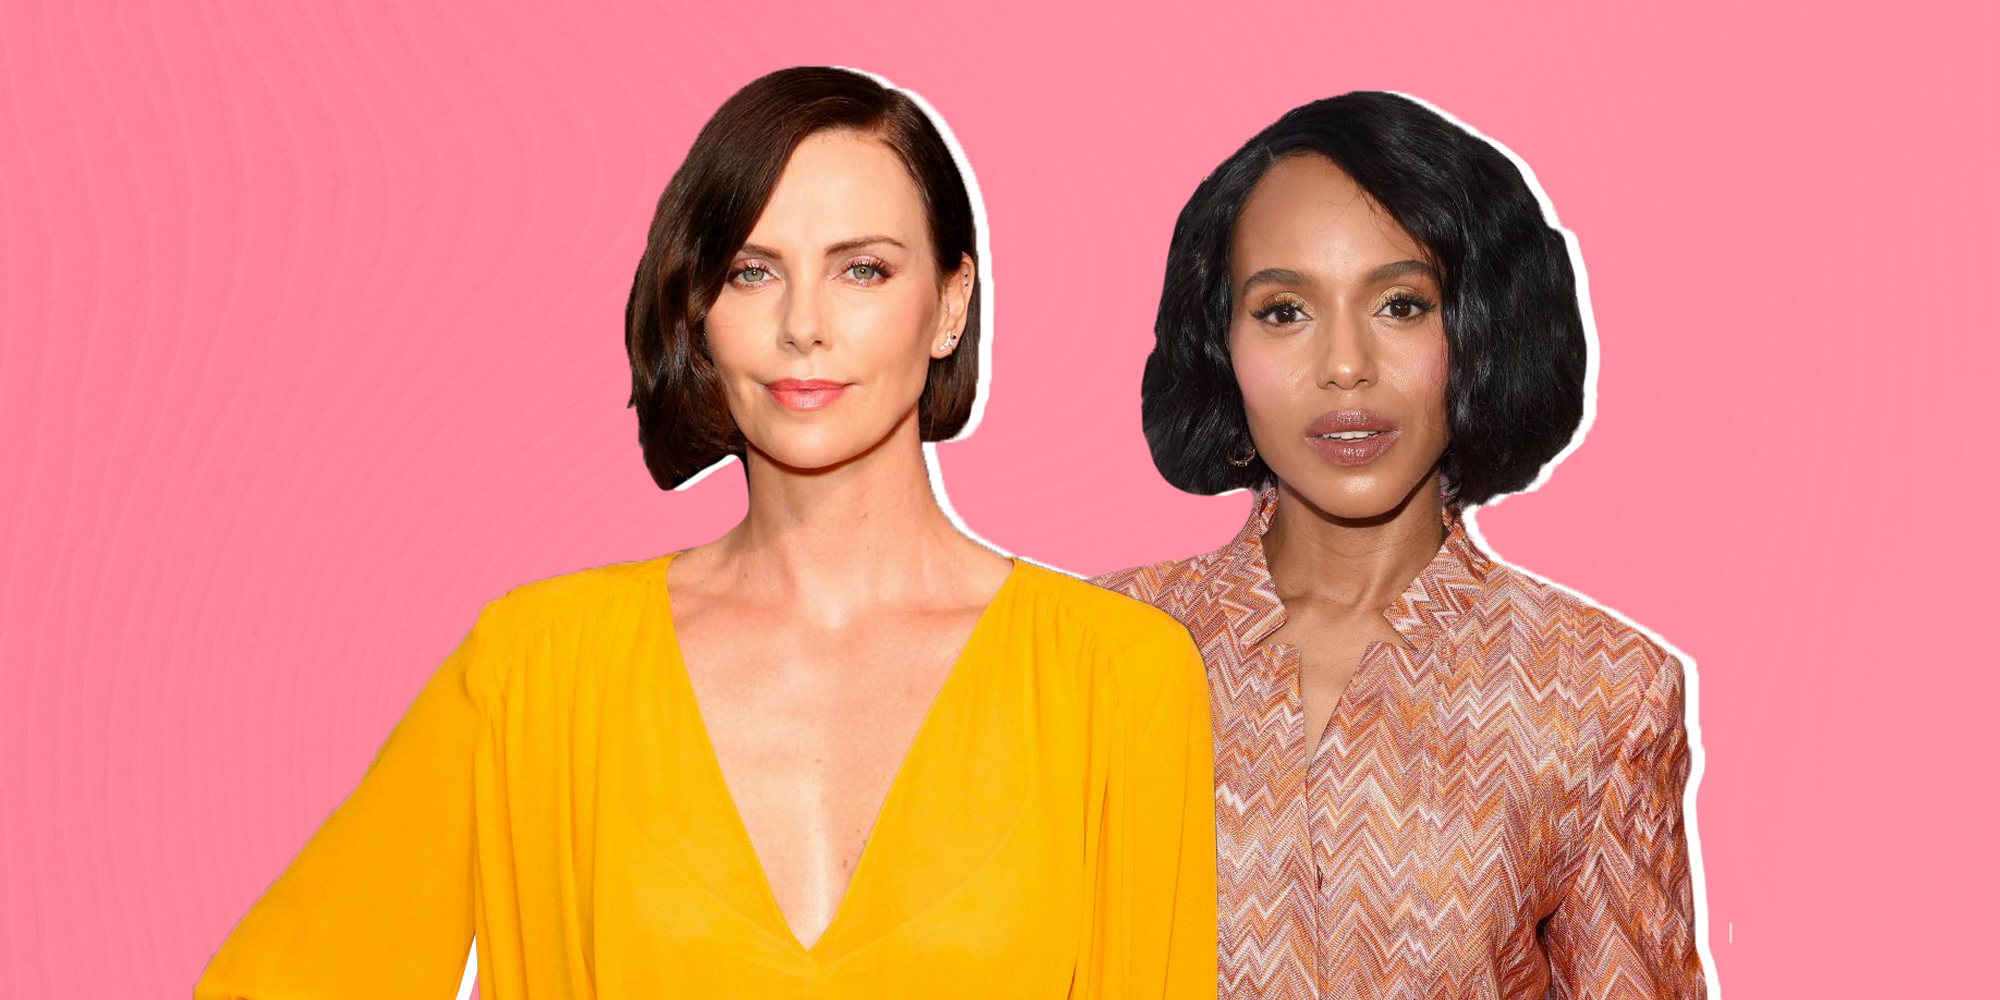 20 Best Bob Haircut Styles To Try 2020